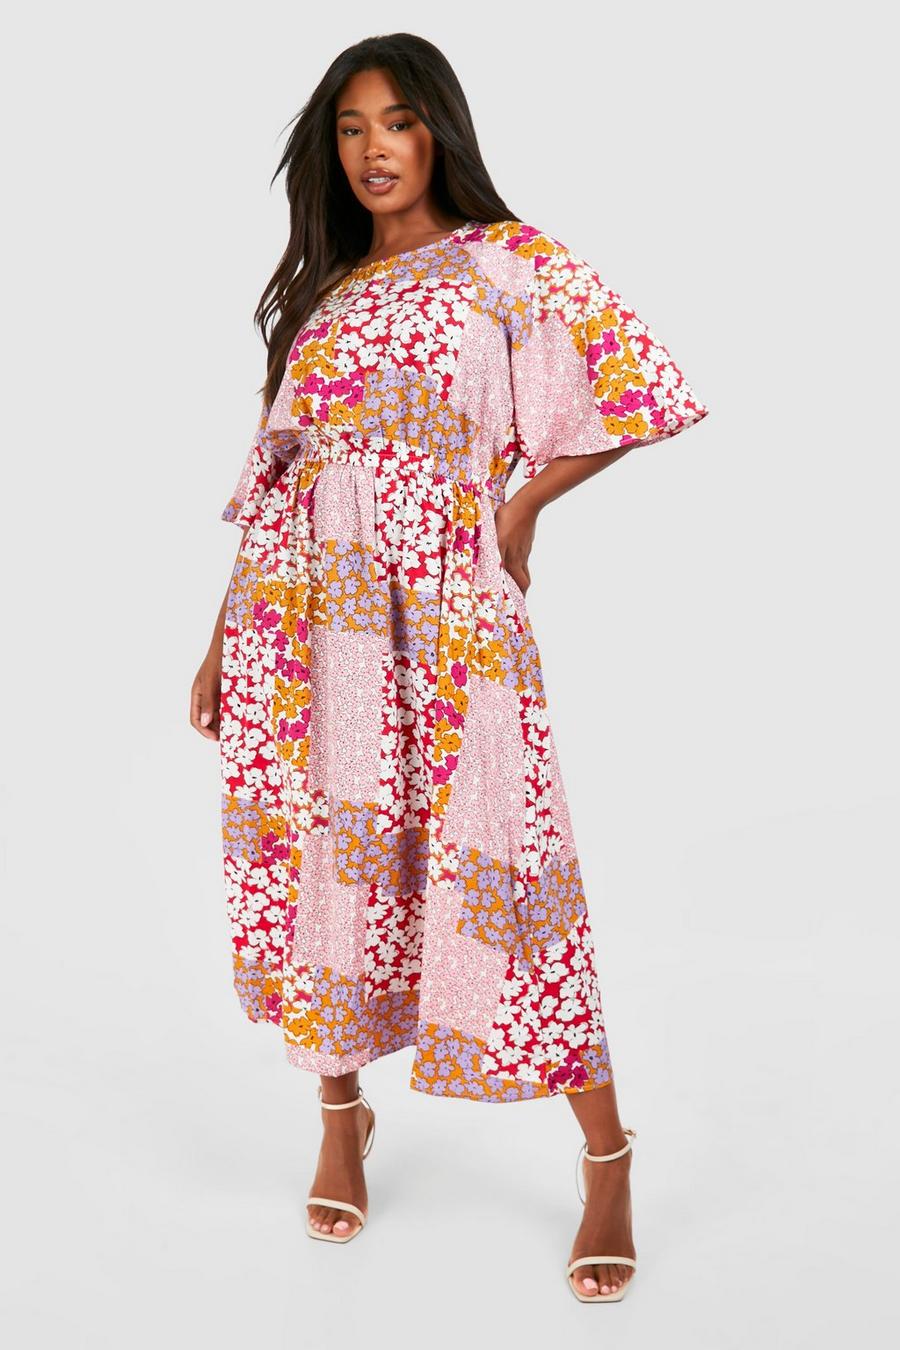 Grande taille - Robe fleurie à manches larges, Multi